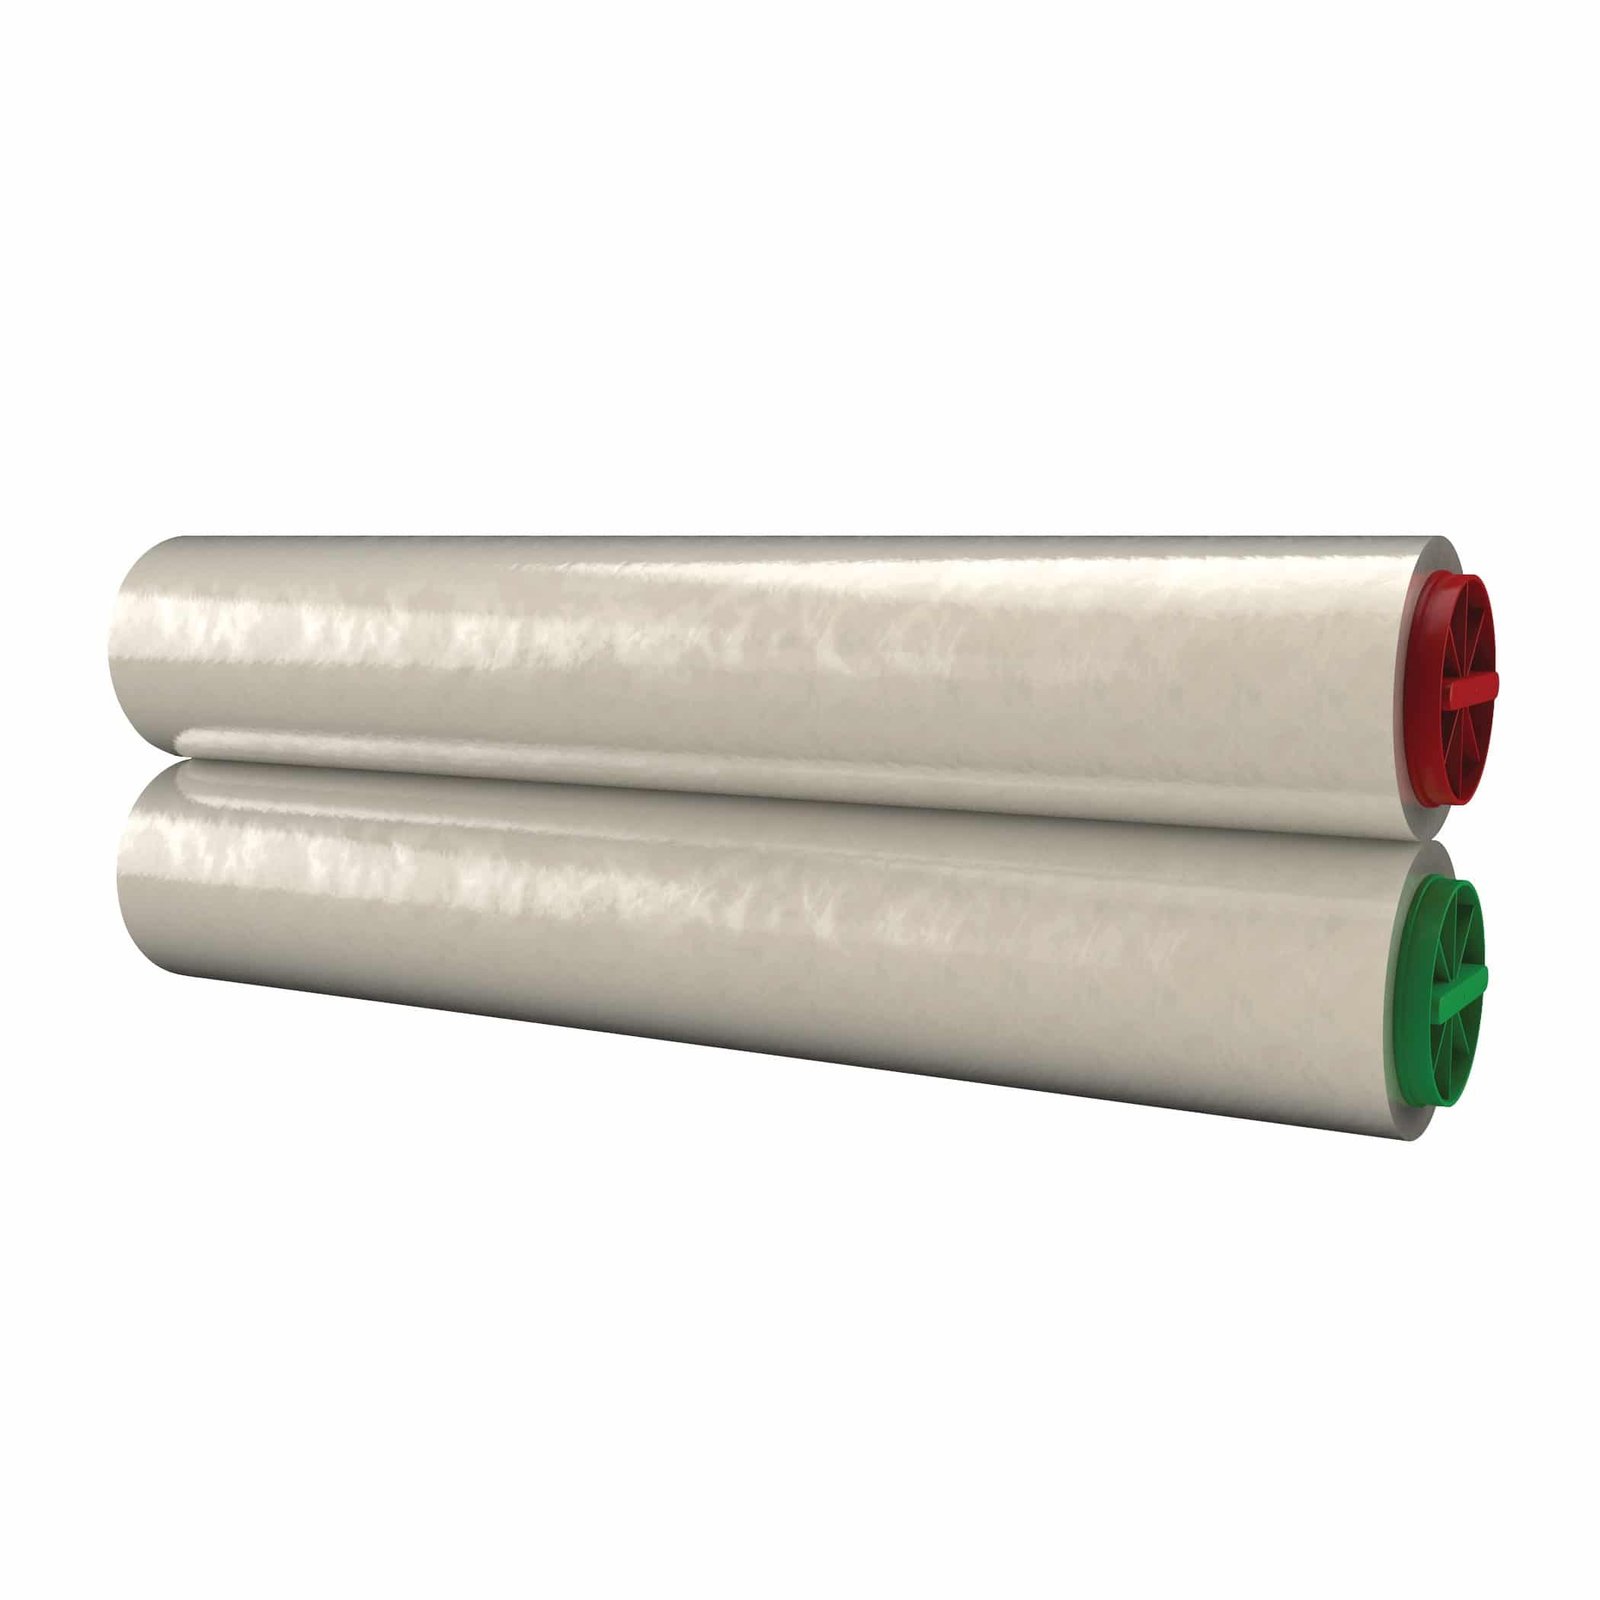 Xyron DL 403-300, 25 x 300', Double Sided Laminate Refill rolls